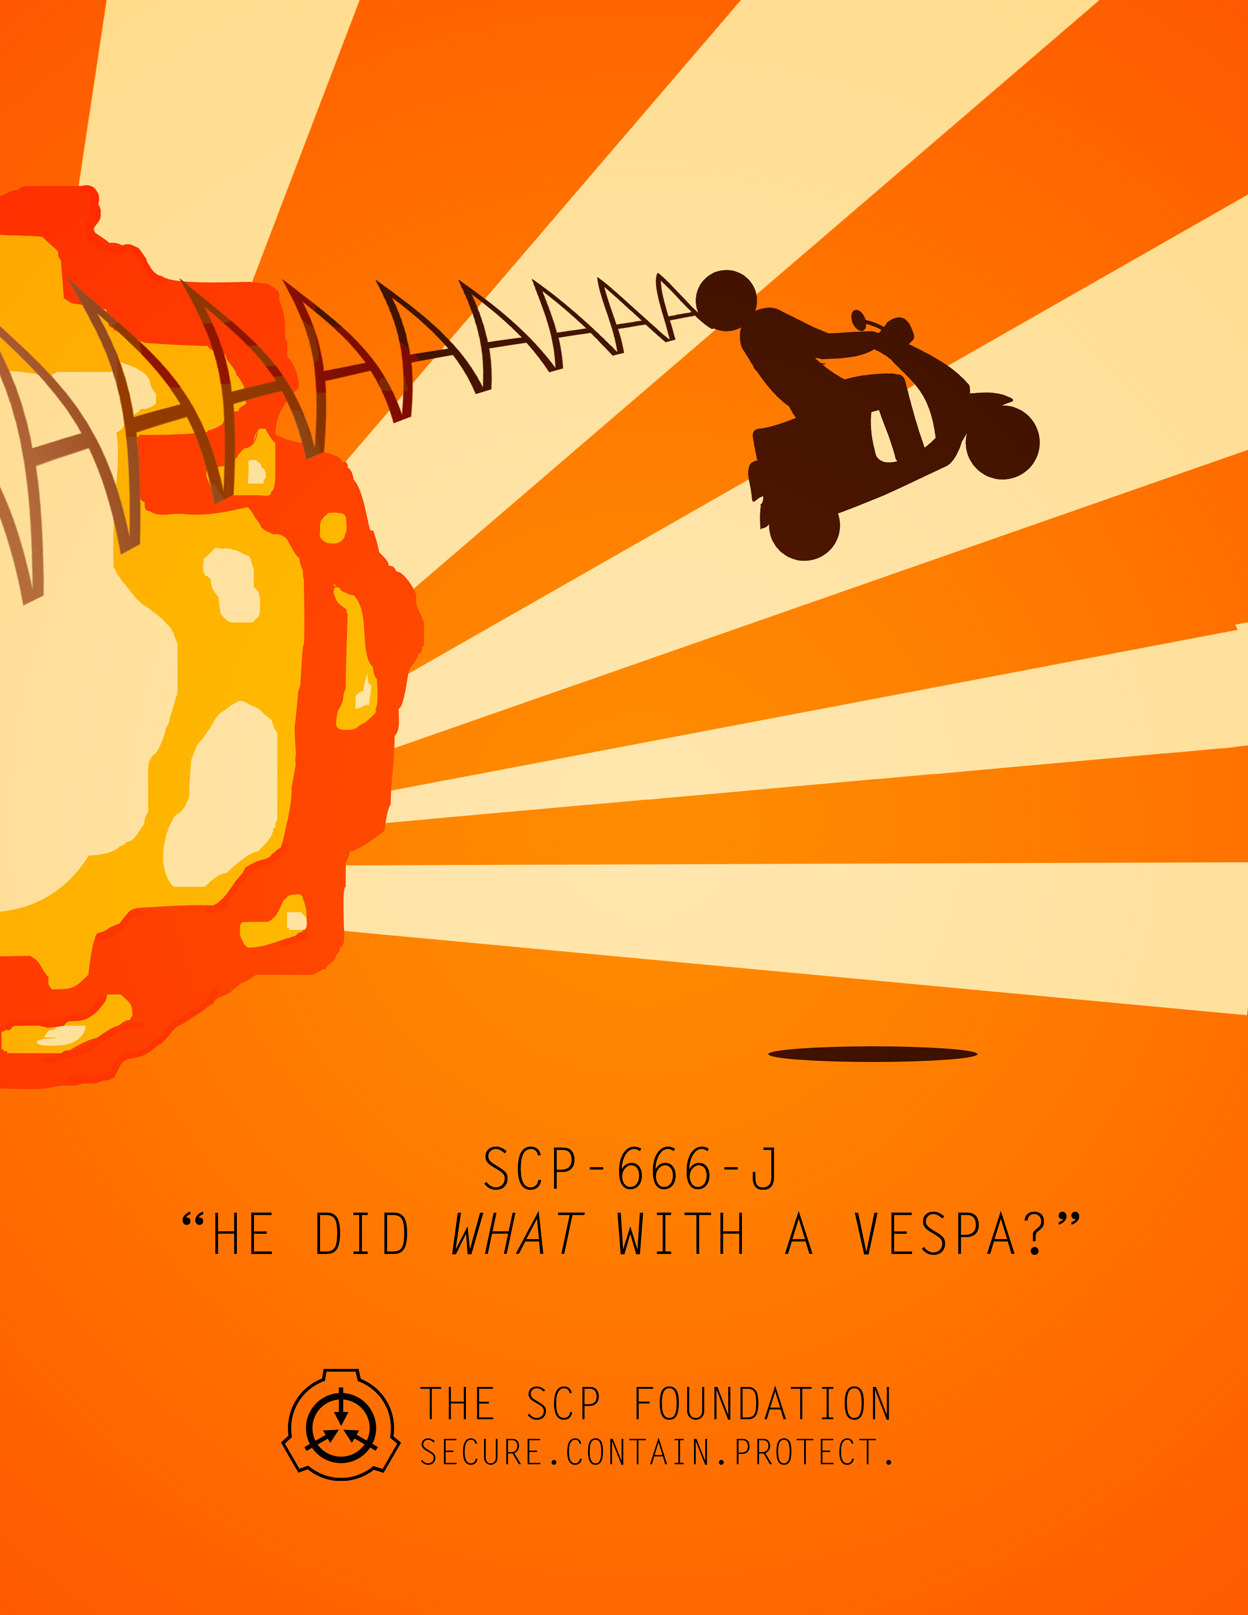 Minimalist SCP Posters - SCP Foundation